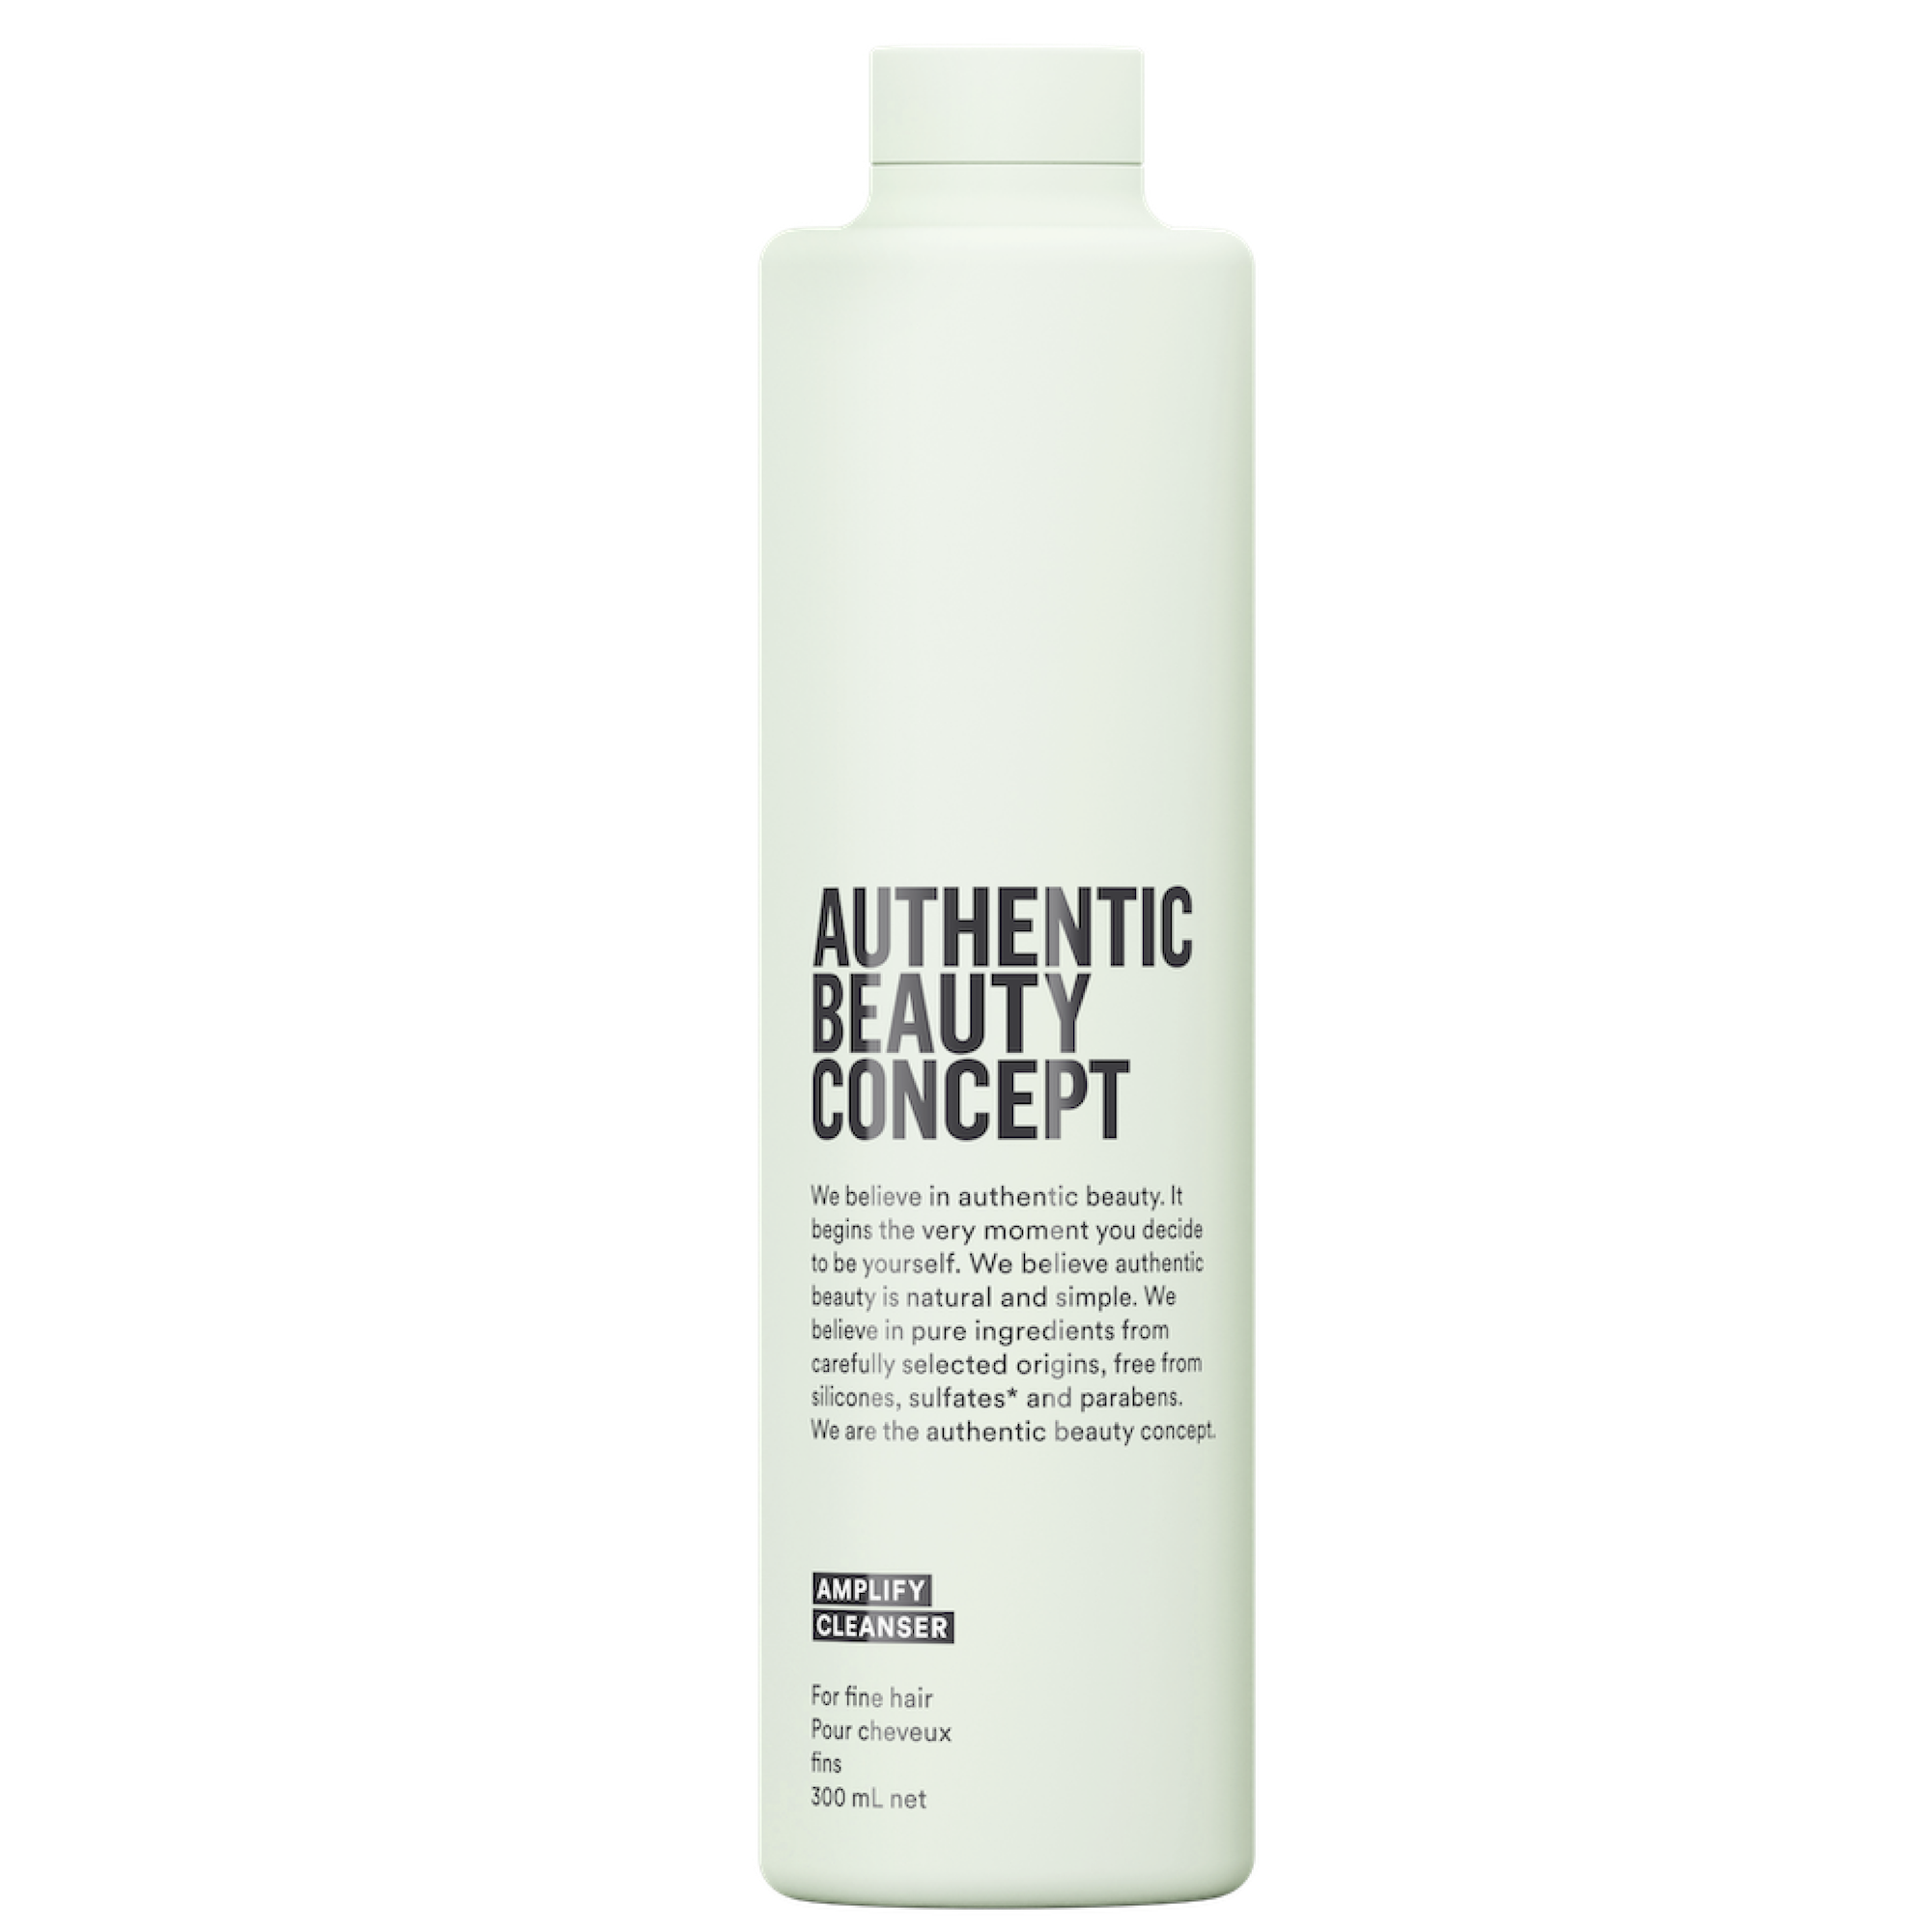 Amplify cleanser